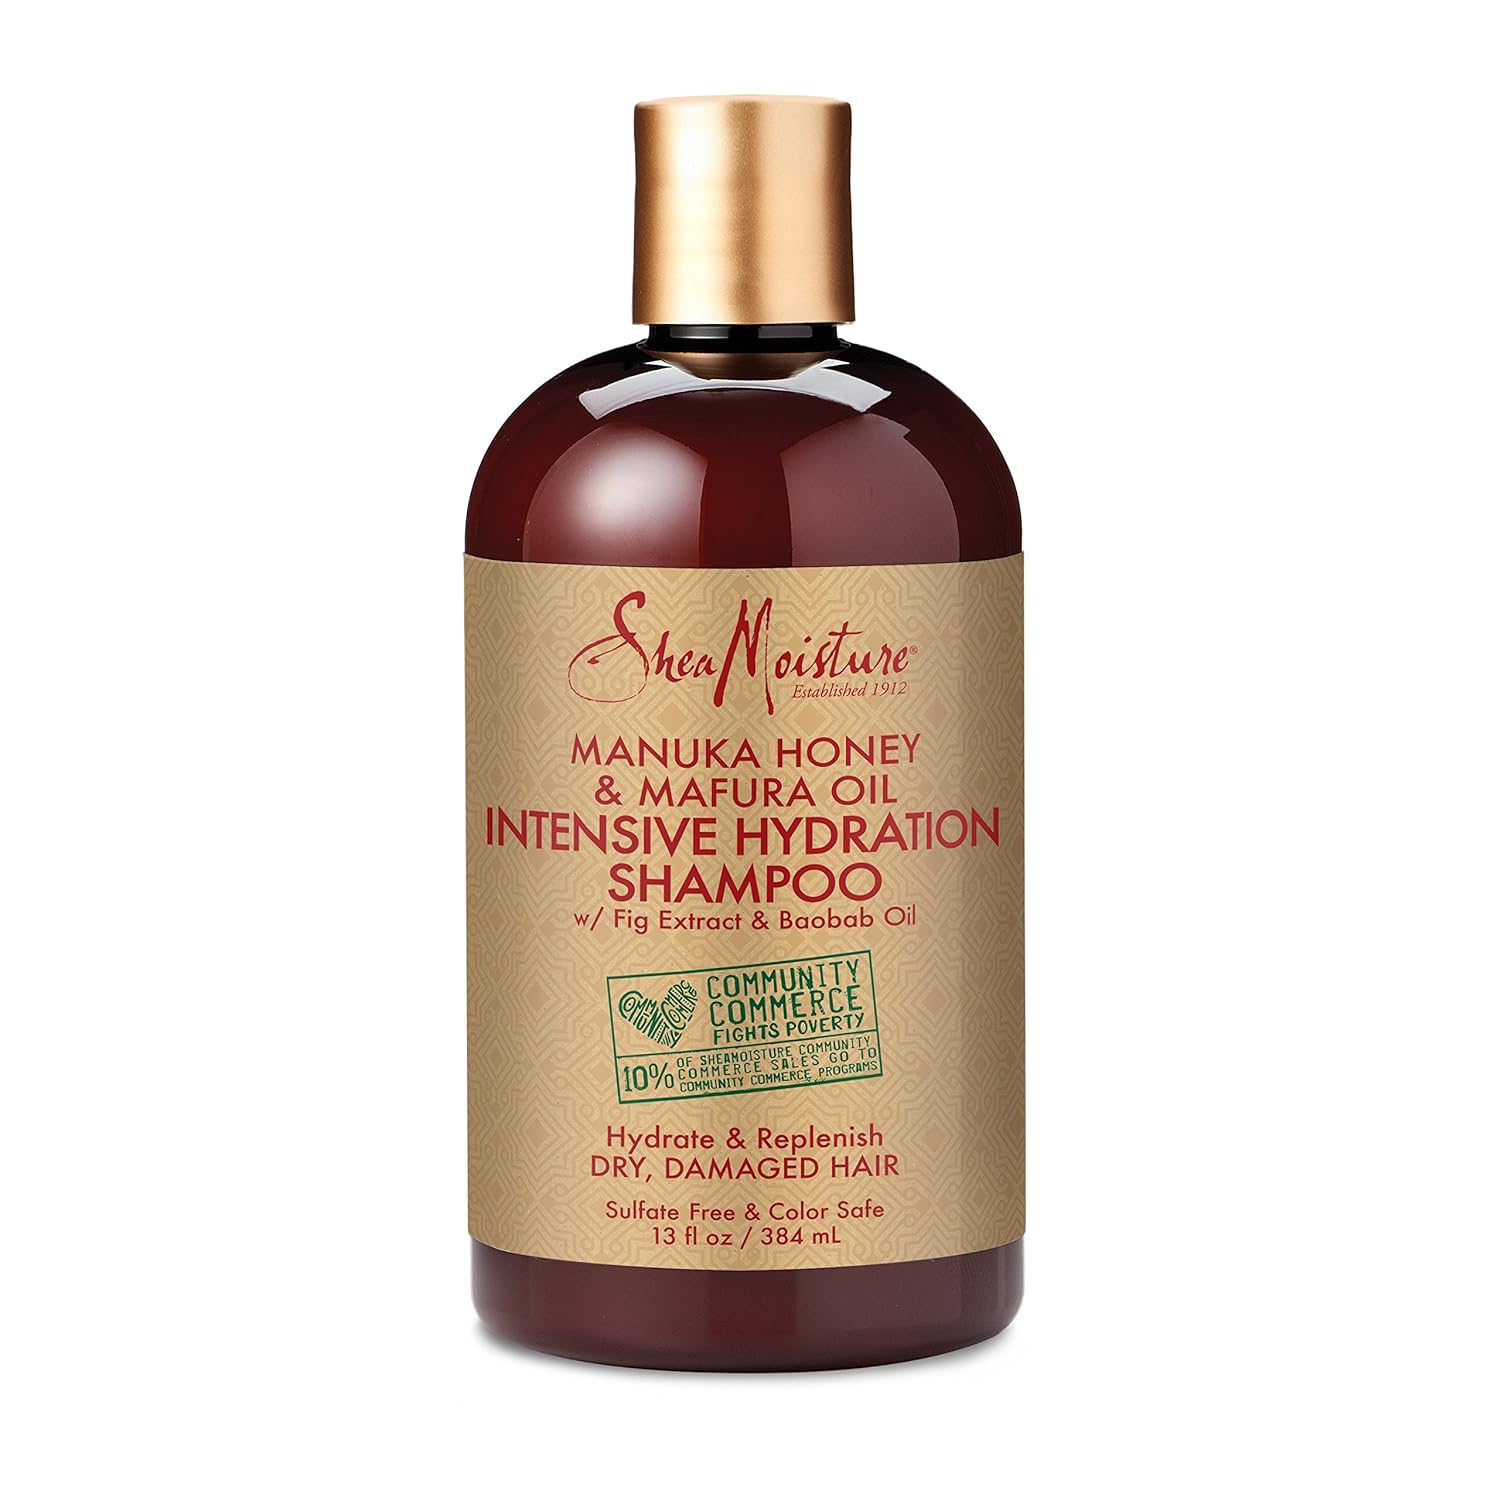 Best Shampoo for Dry and Damaged Hair: Top 5 Solutions Revealed